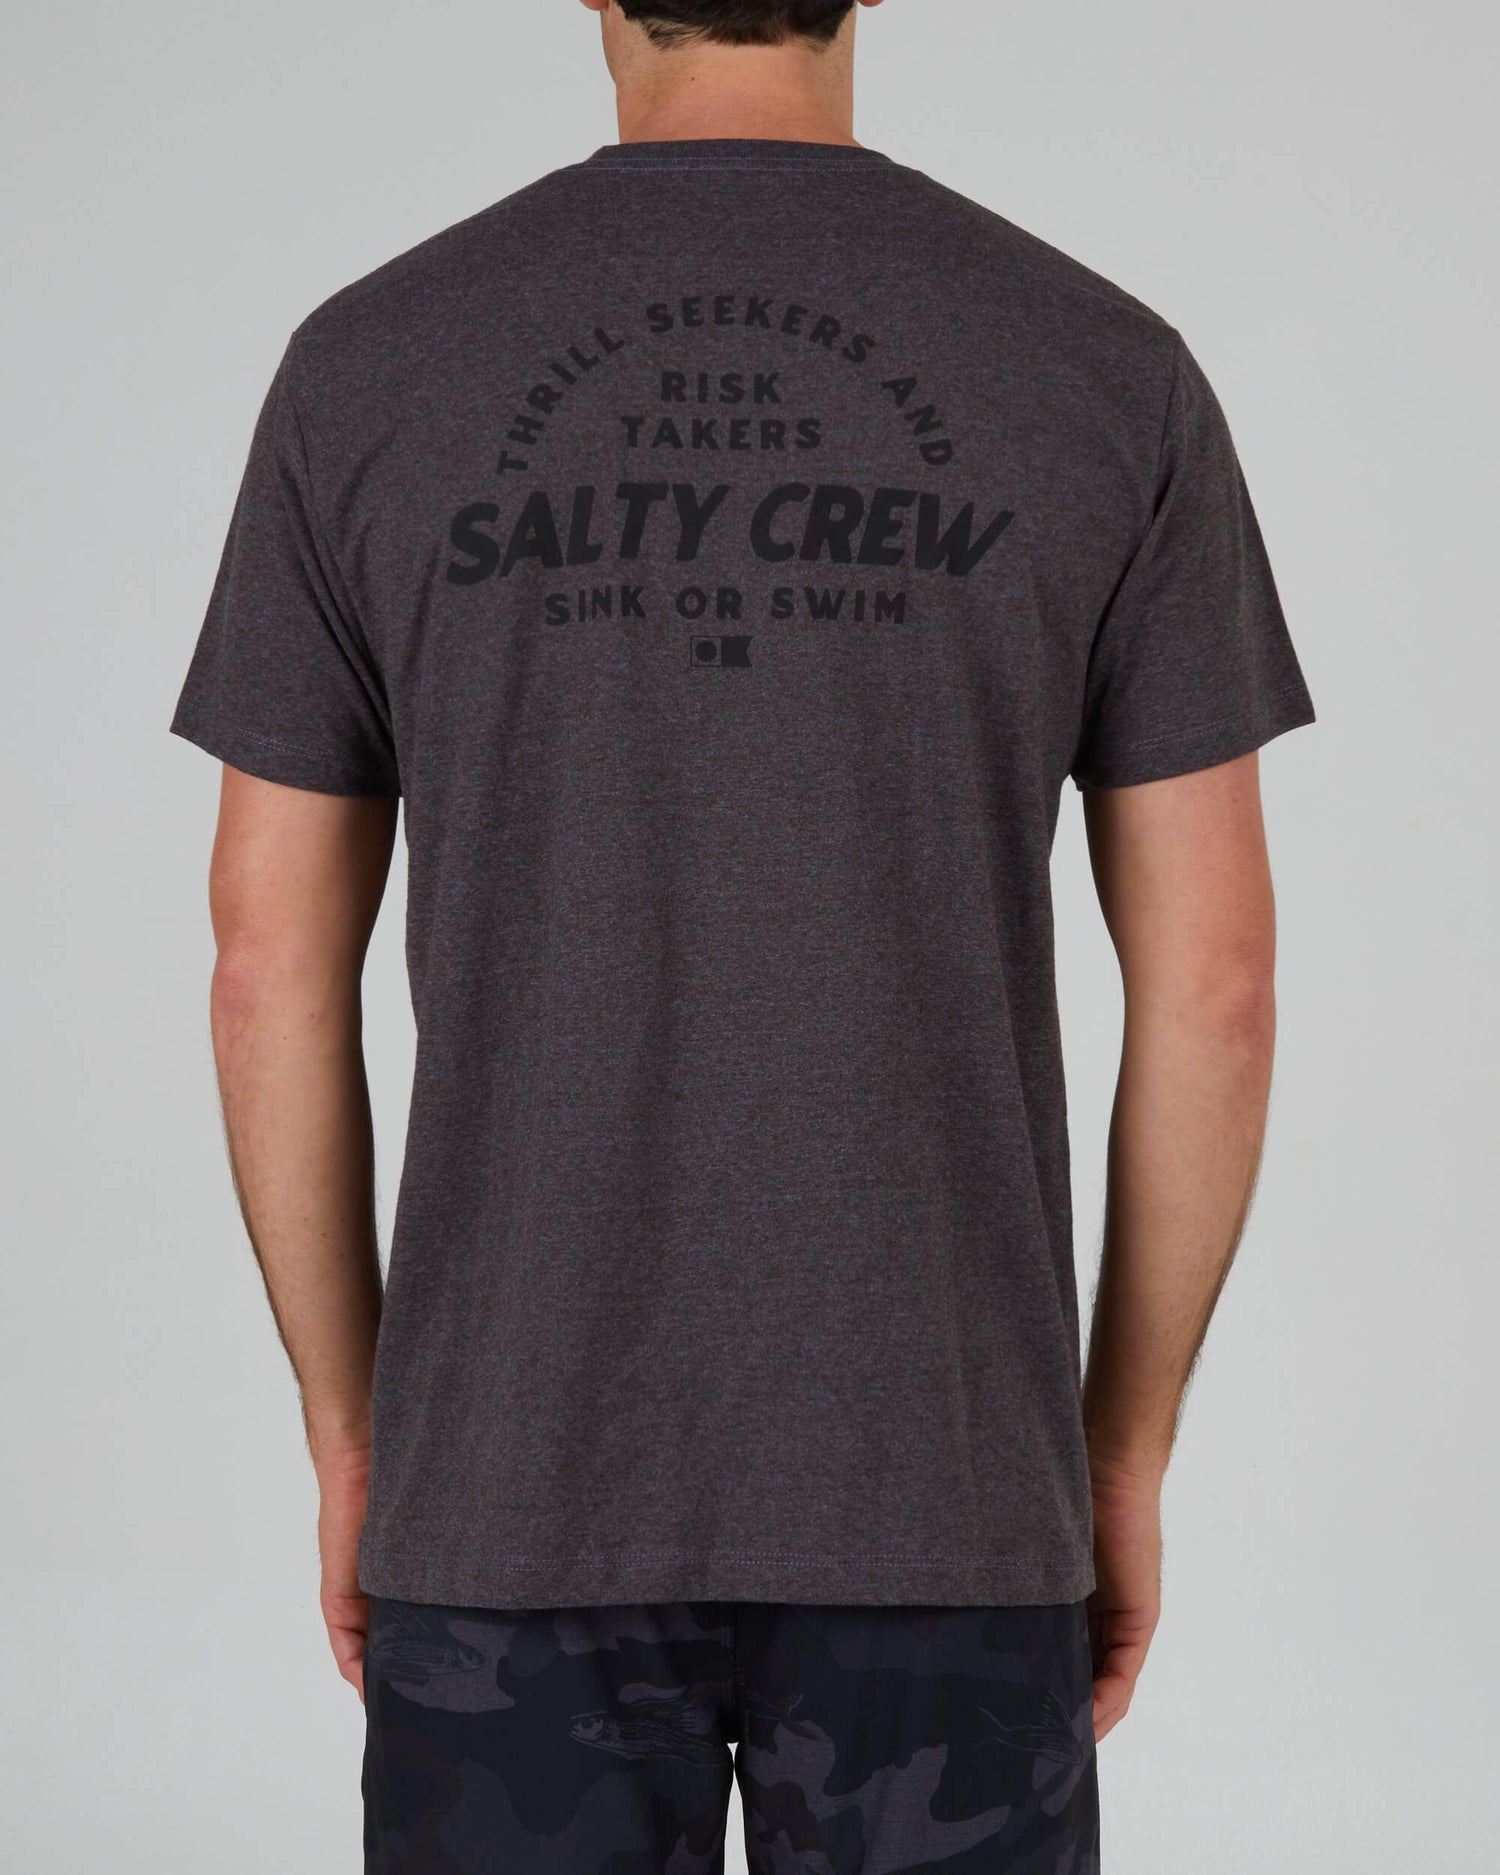 Salty crew T-SHIRTS S/S Stoked Standard S/S Tee - Charcoal Heather in Charcoal Heather